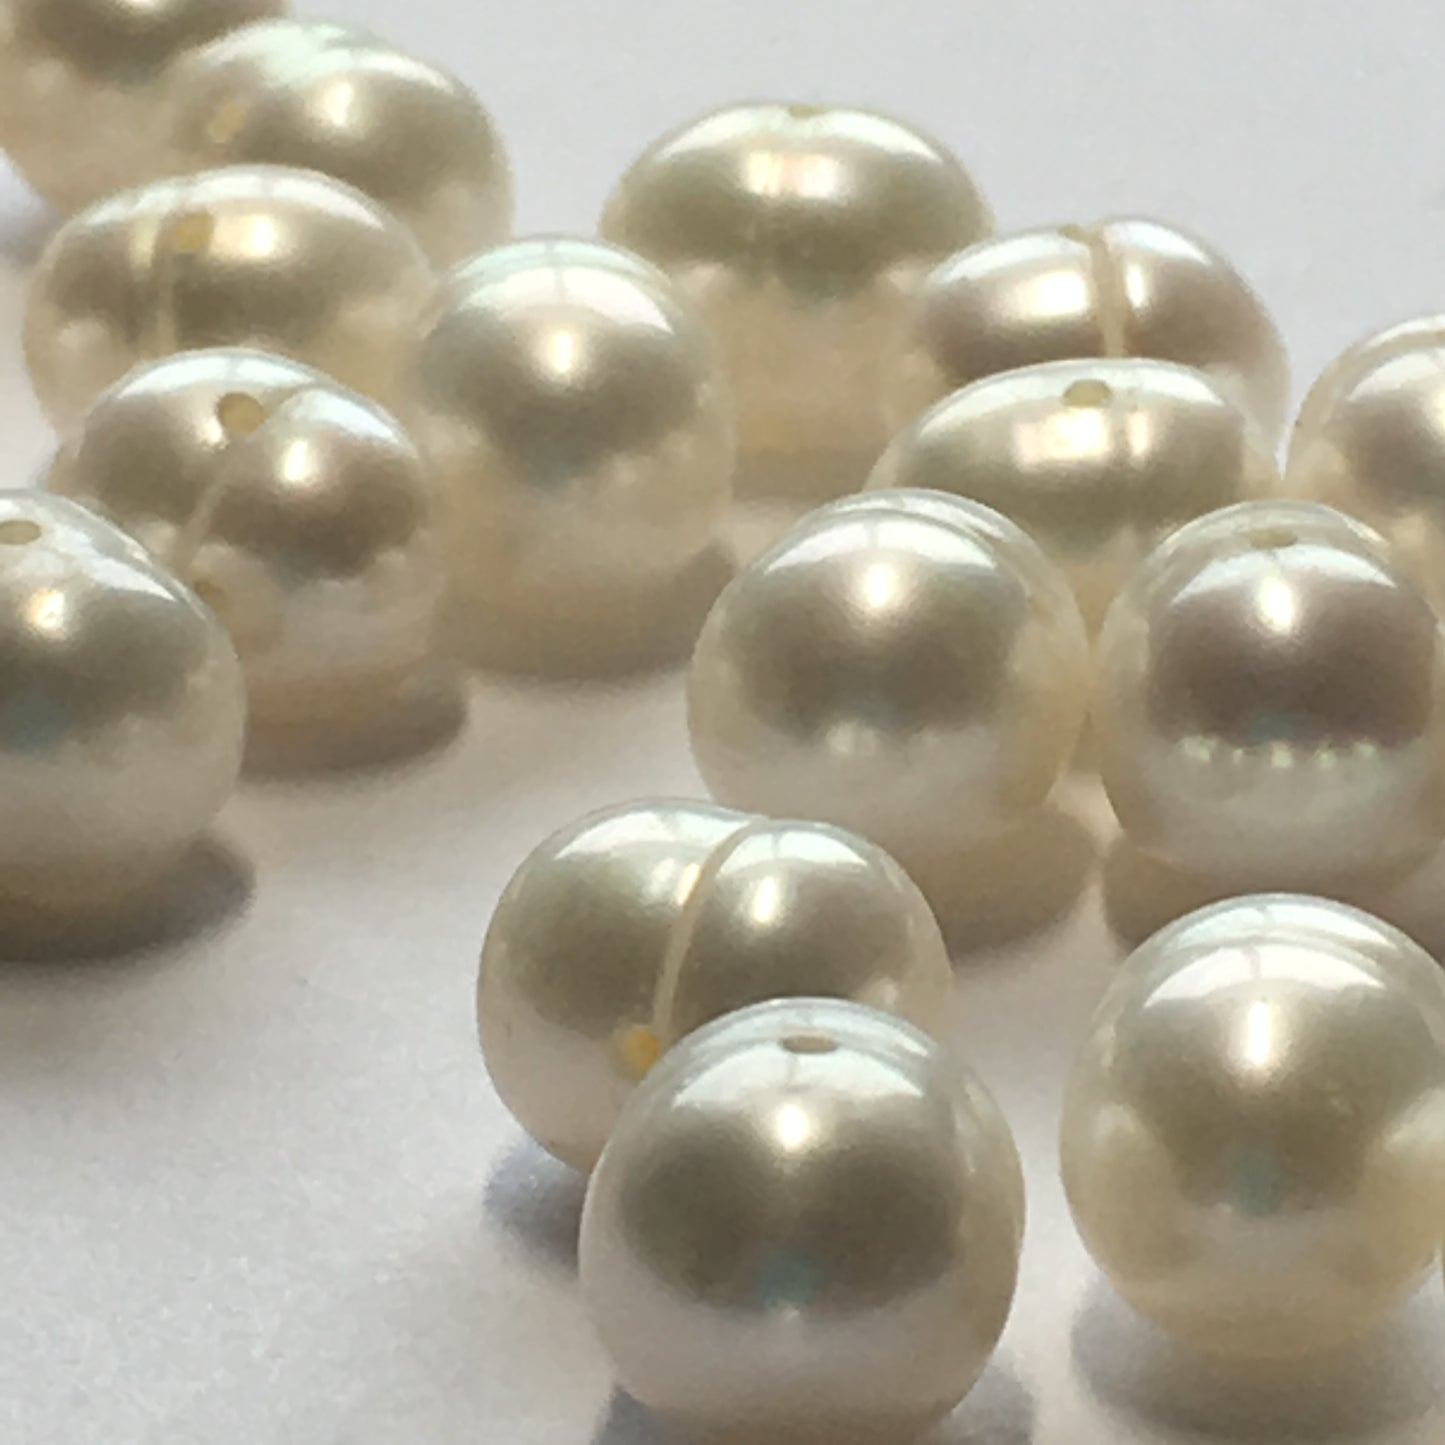 Natural White Potato Pearls, Side-Drilled, 7 x 8 mm, 31 Pearls